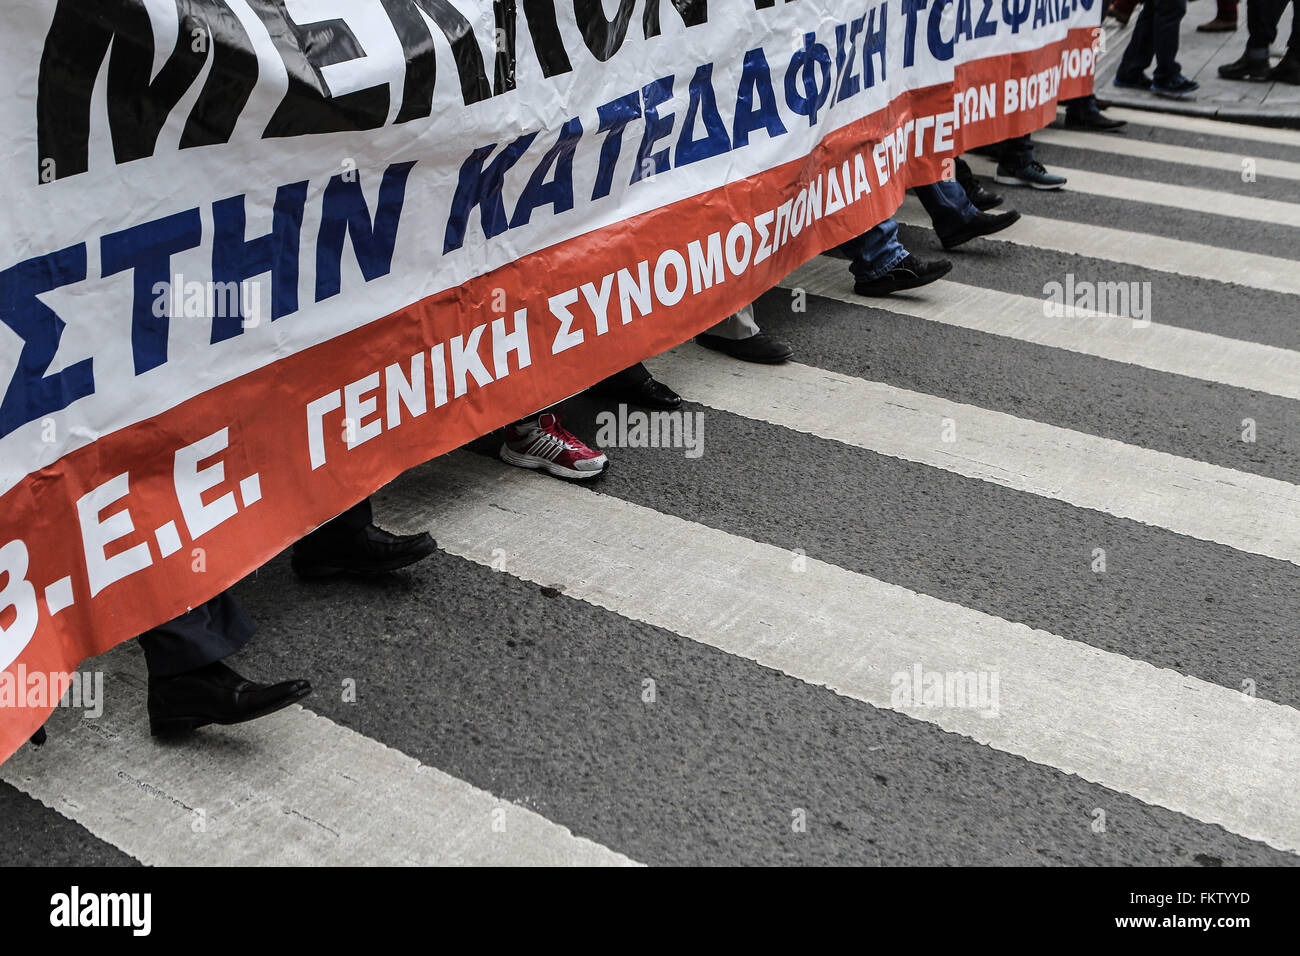 Athens, Greece. 9th Mar, 2016. Greek protesters march to the parliament carrying a banner reading 'Our future is not for sale. No to the destruction of the pension system' in Athens, capital of Greece, on March 9, 2016. A new round of Greece's bailout program review resumed Wednesday with hope the two sides bridge the gap on the next set of fiscal adjustment and reform measures. © Lefteris Partsalis/Xinhua/Alamy Live News Stock Photo